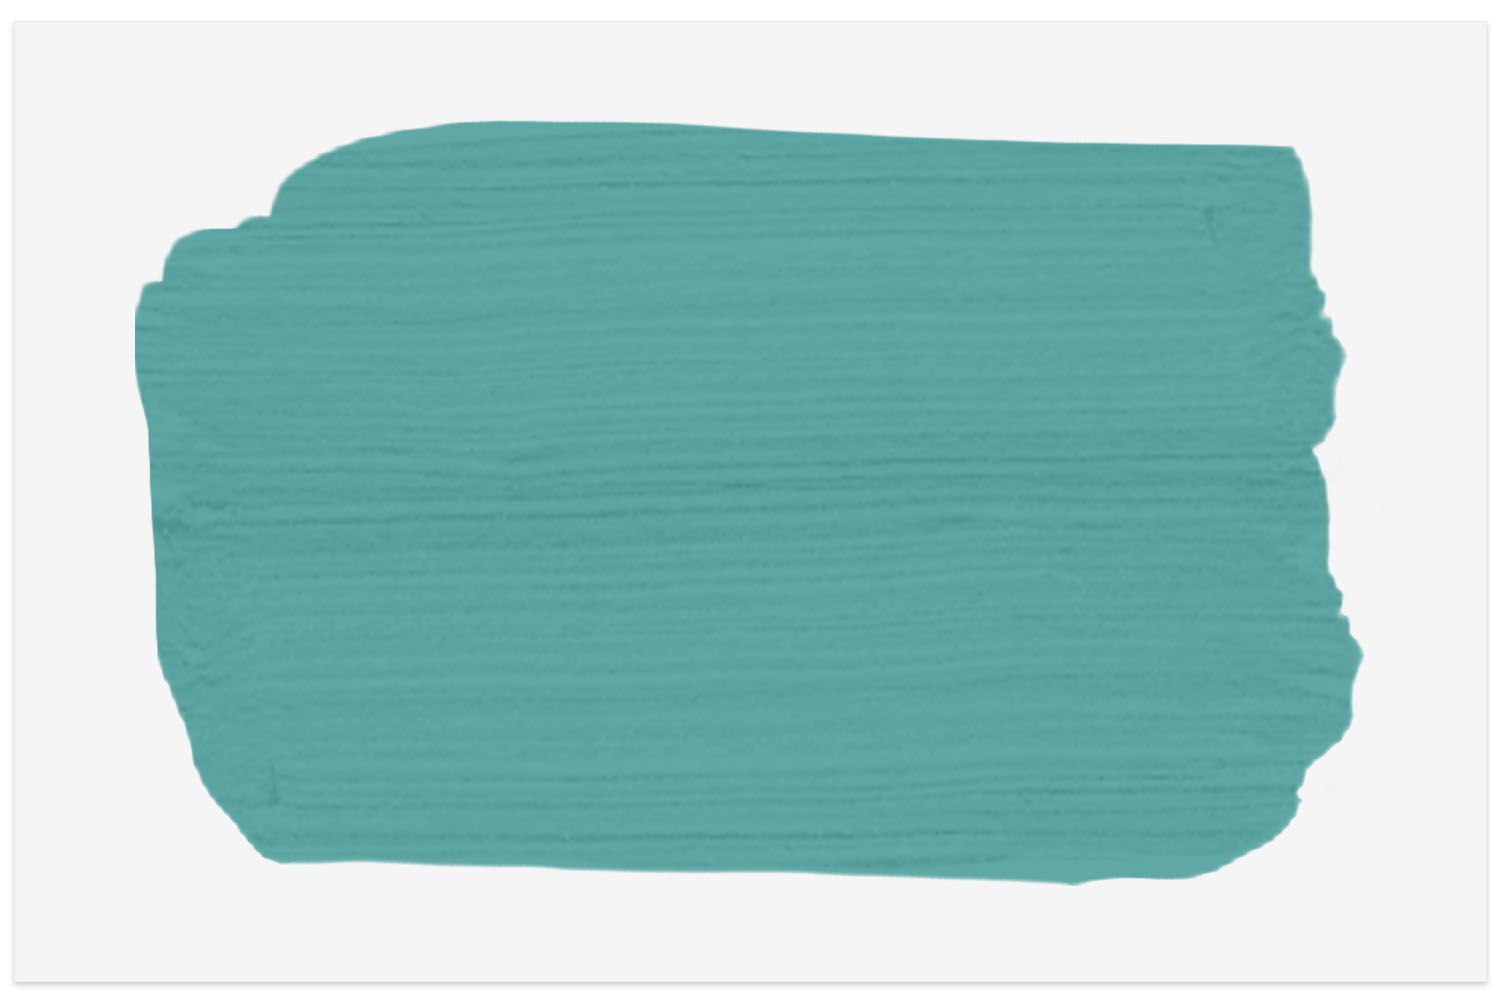 Behr Teal Zeal paint swatch